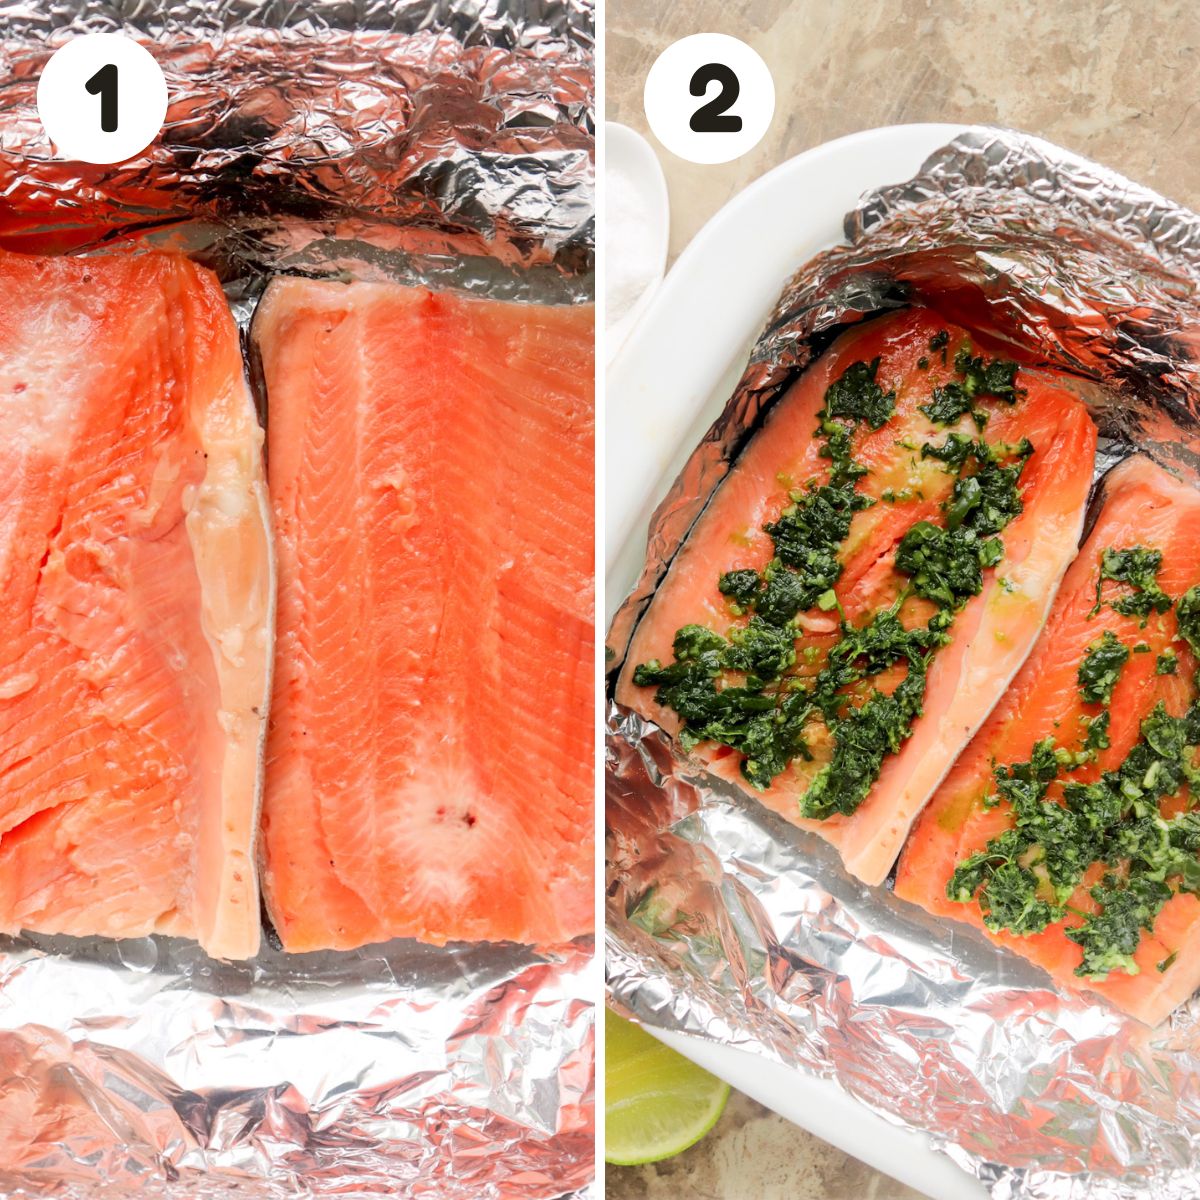 Steps to bake the salmon.